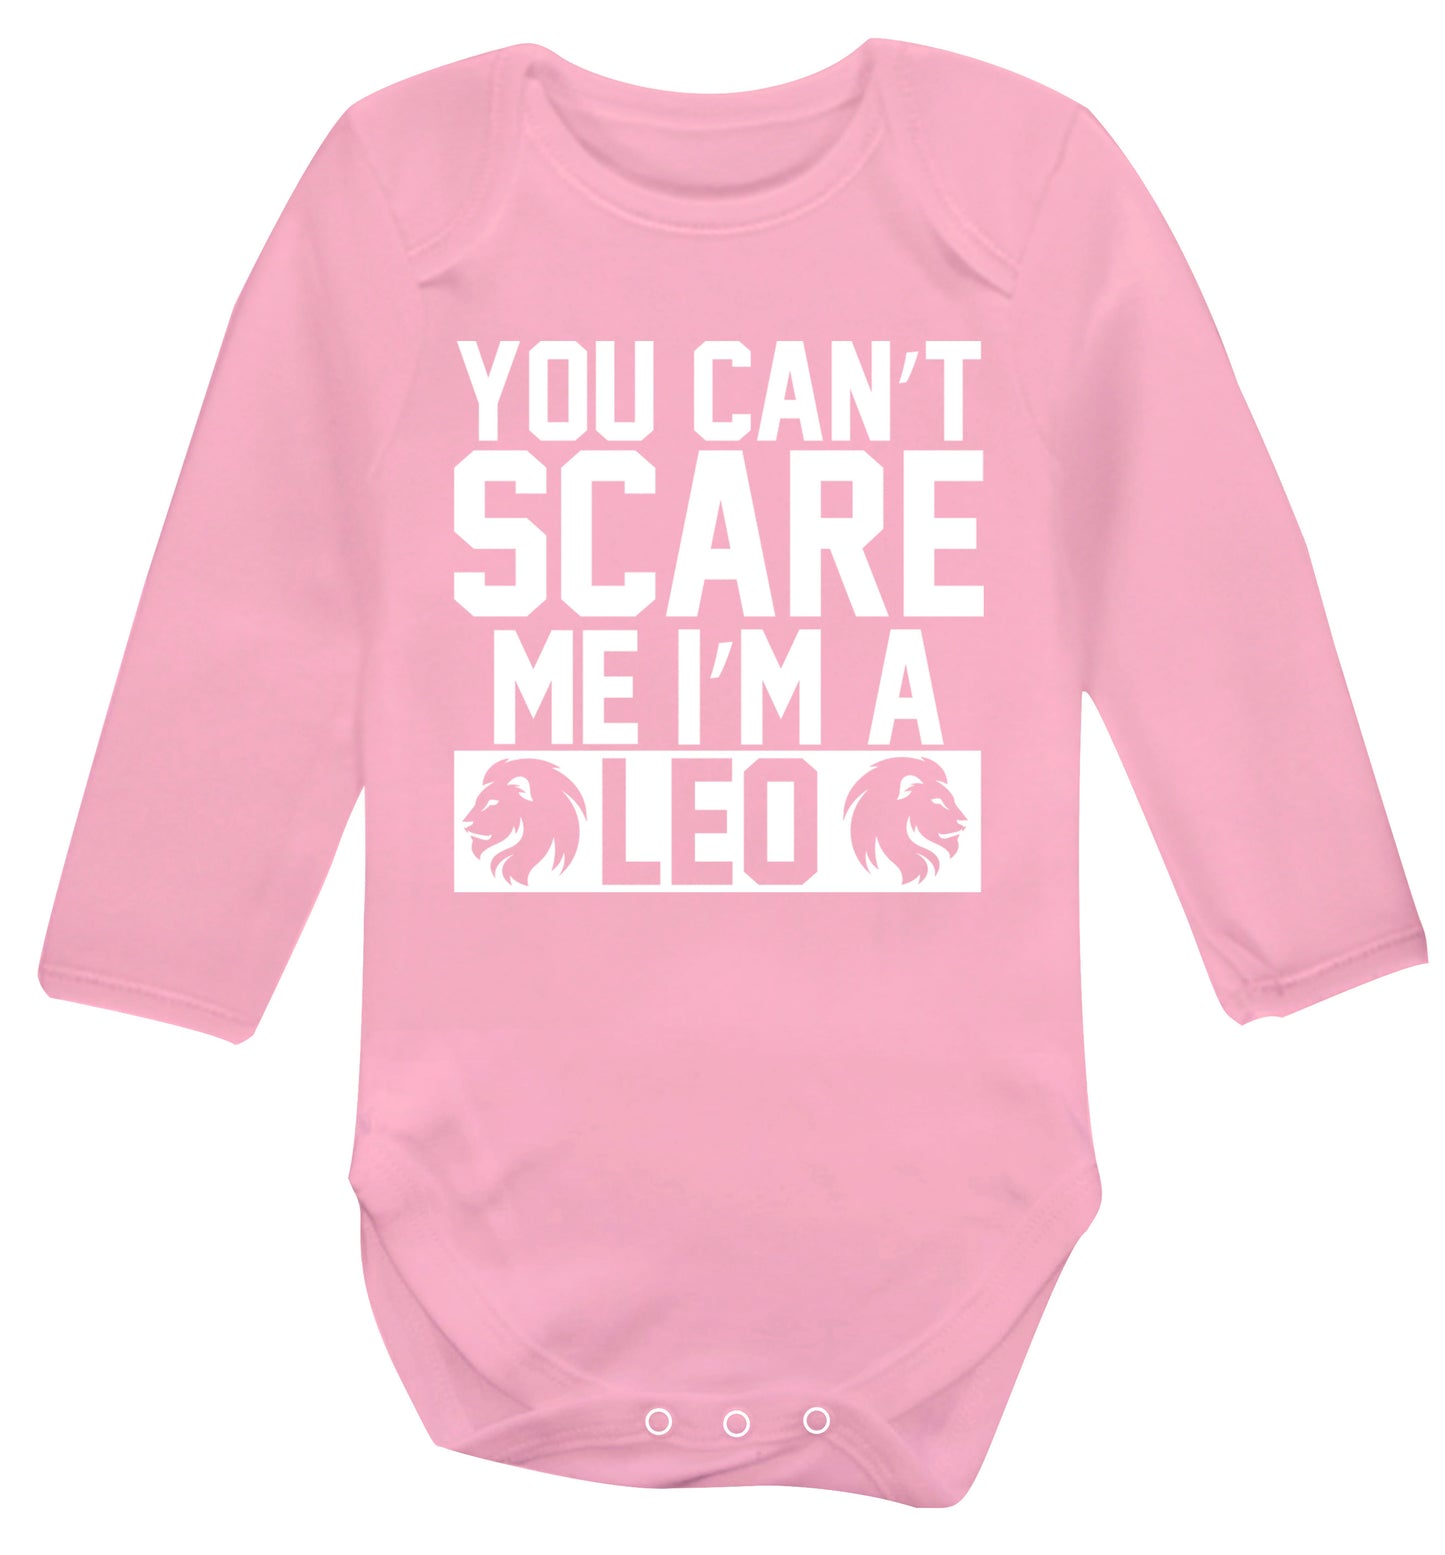 You can't scare me I'm a leo Baby Vest long sleeved pale pink 6-12 months